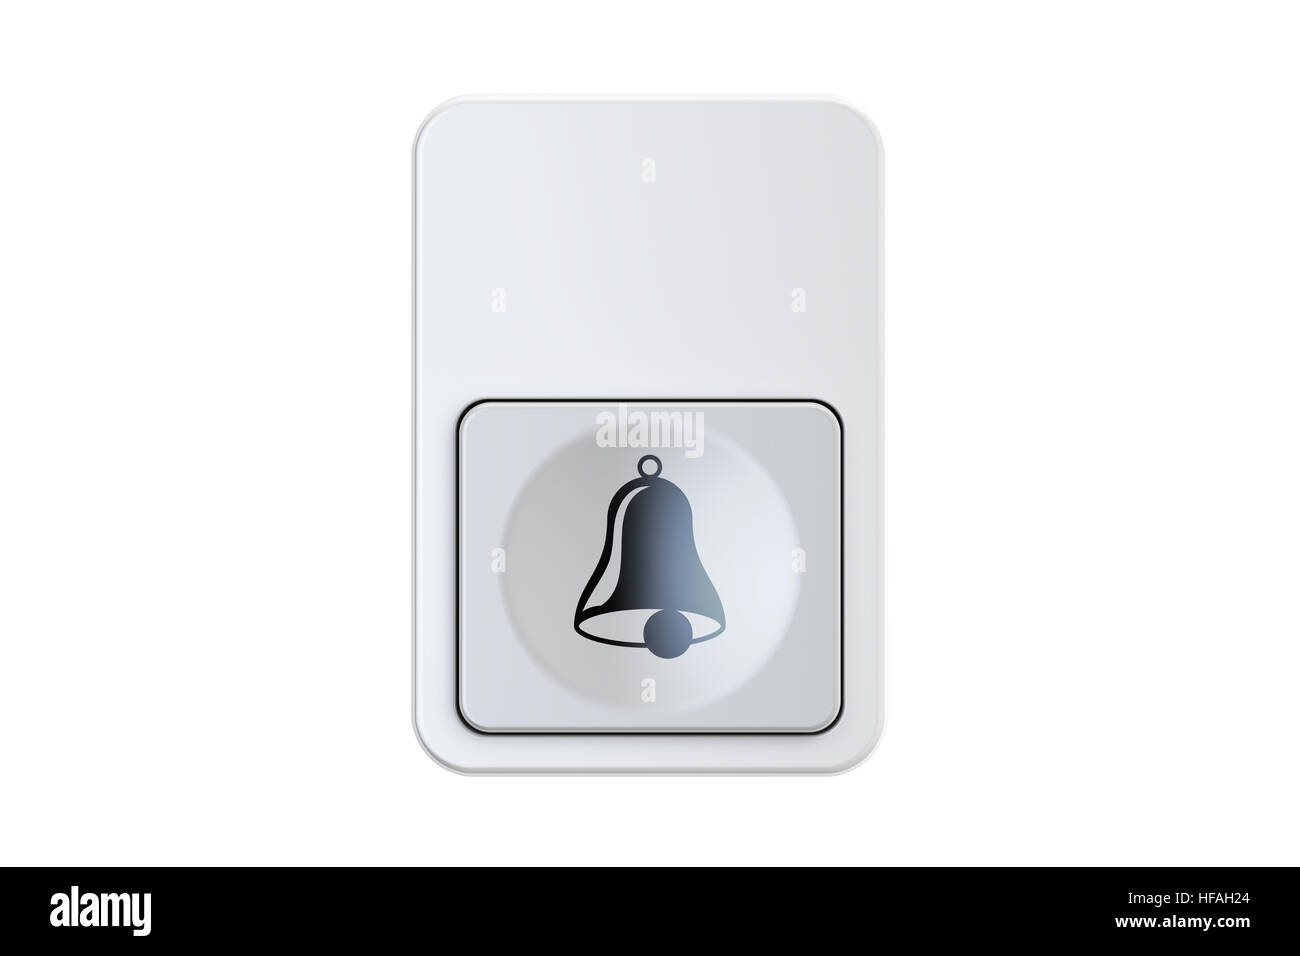 White doorbell button, 3D rendering isolated on white background Stock Photo